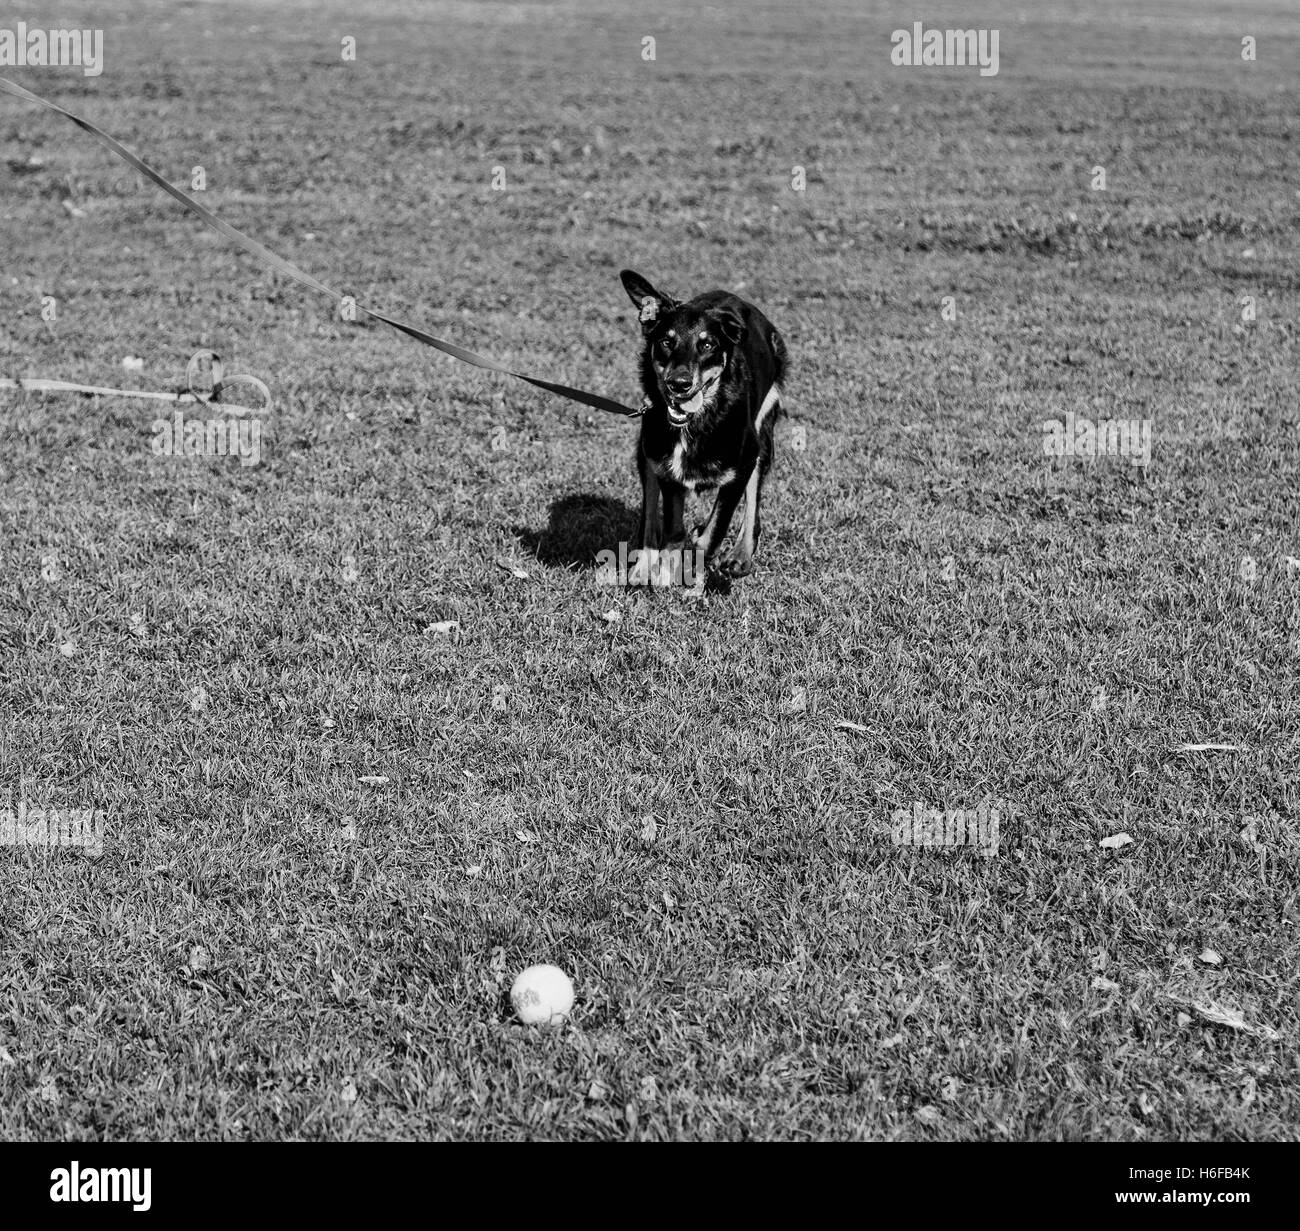 Beauceron with Australian Shepherd dog running after a tennis ball in the park on a sunny day. Stock Photo